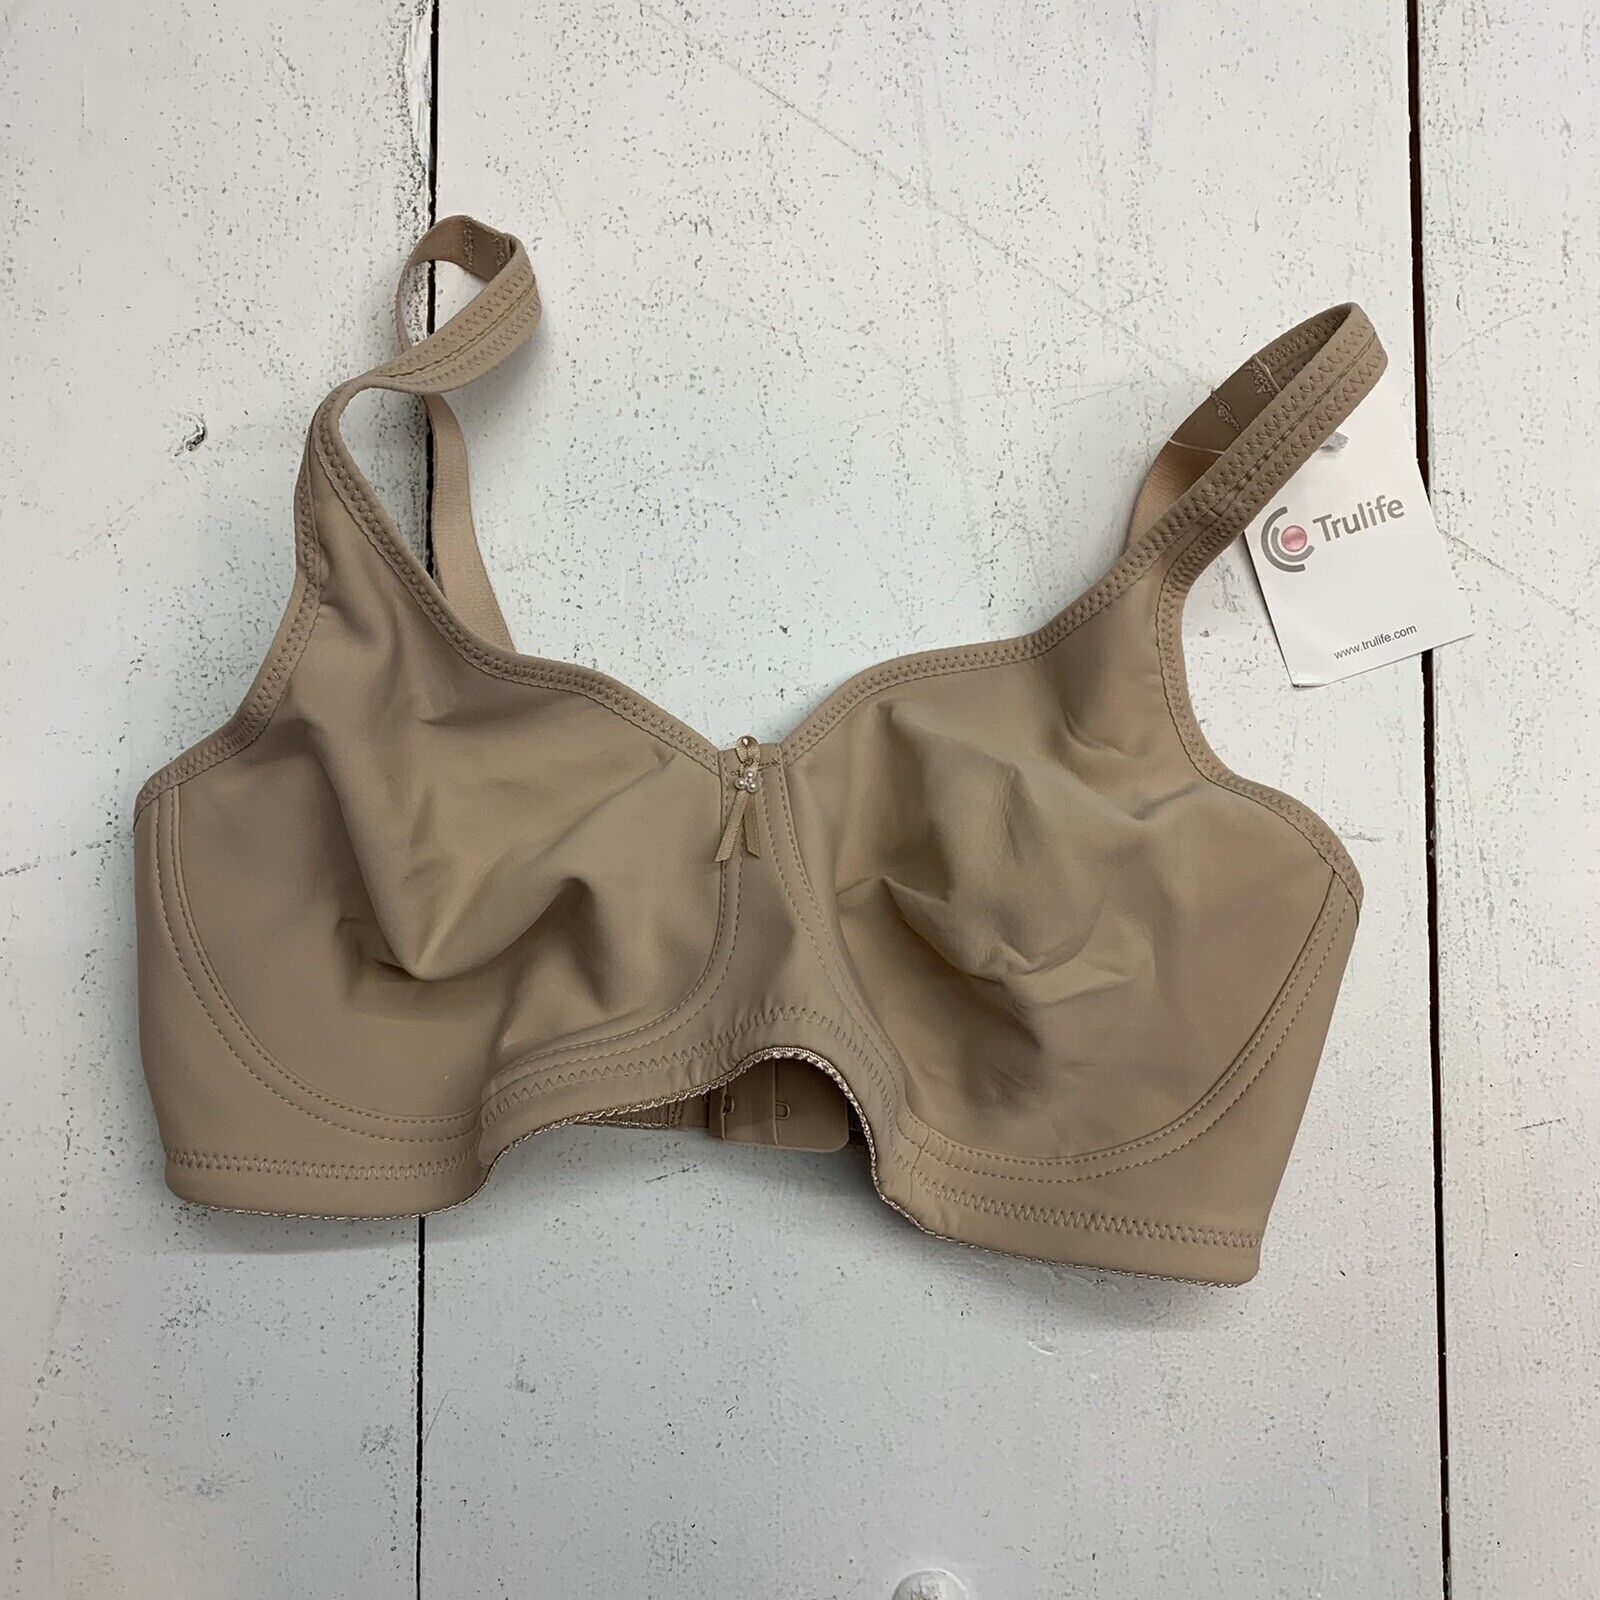 Trulife Masectomy Tan Bra Size 36D - beyond exchange